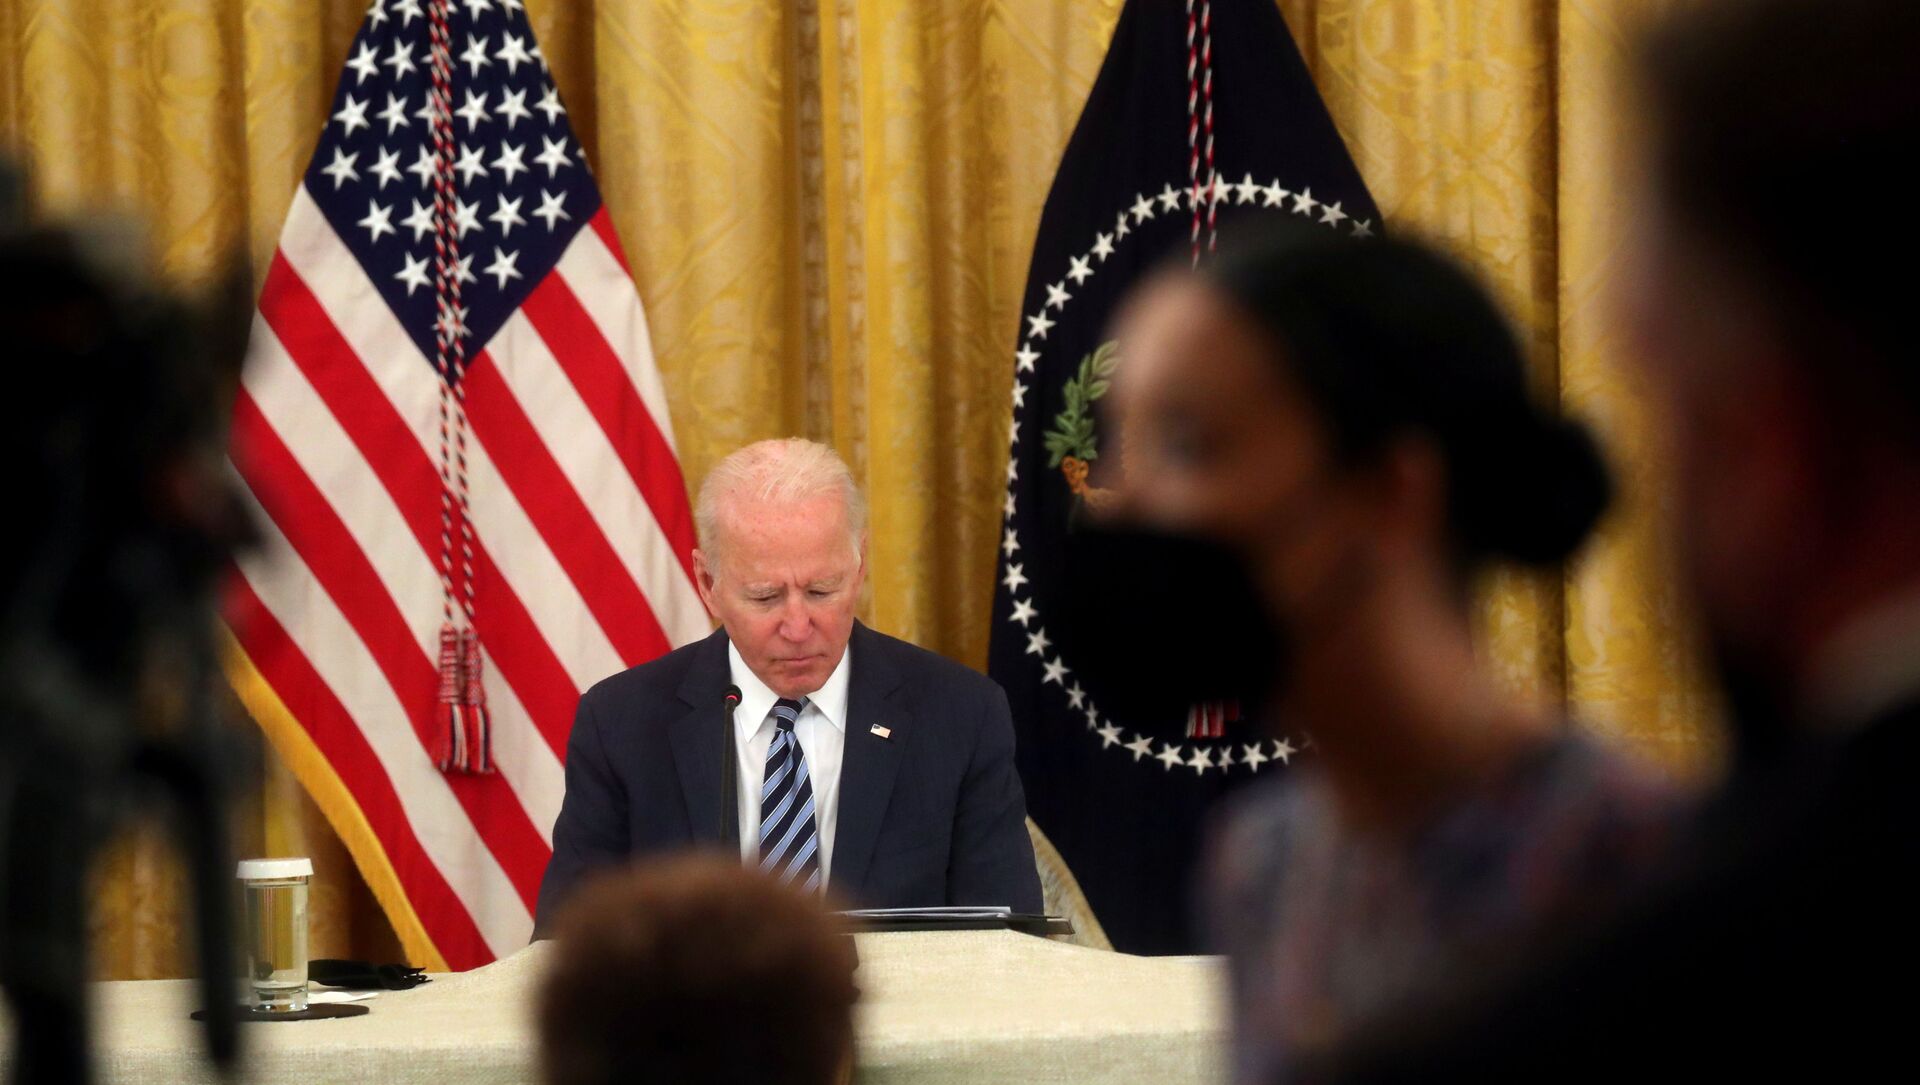 U.S. President Joe Biden waits for the news media to be ushered out of the room after delivering remarks during a meeting with members of his national security team and private sector leaders to discuss how to improve the nation's cybersecurity, in the East Room at the White House in Washington, U.S., August 25, 2021 - Sputnik International, 1920, 26.08.2021